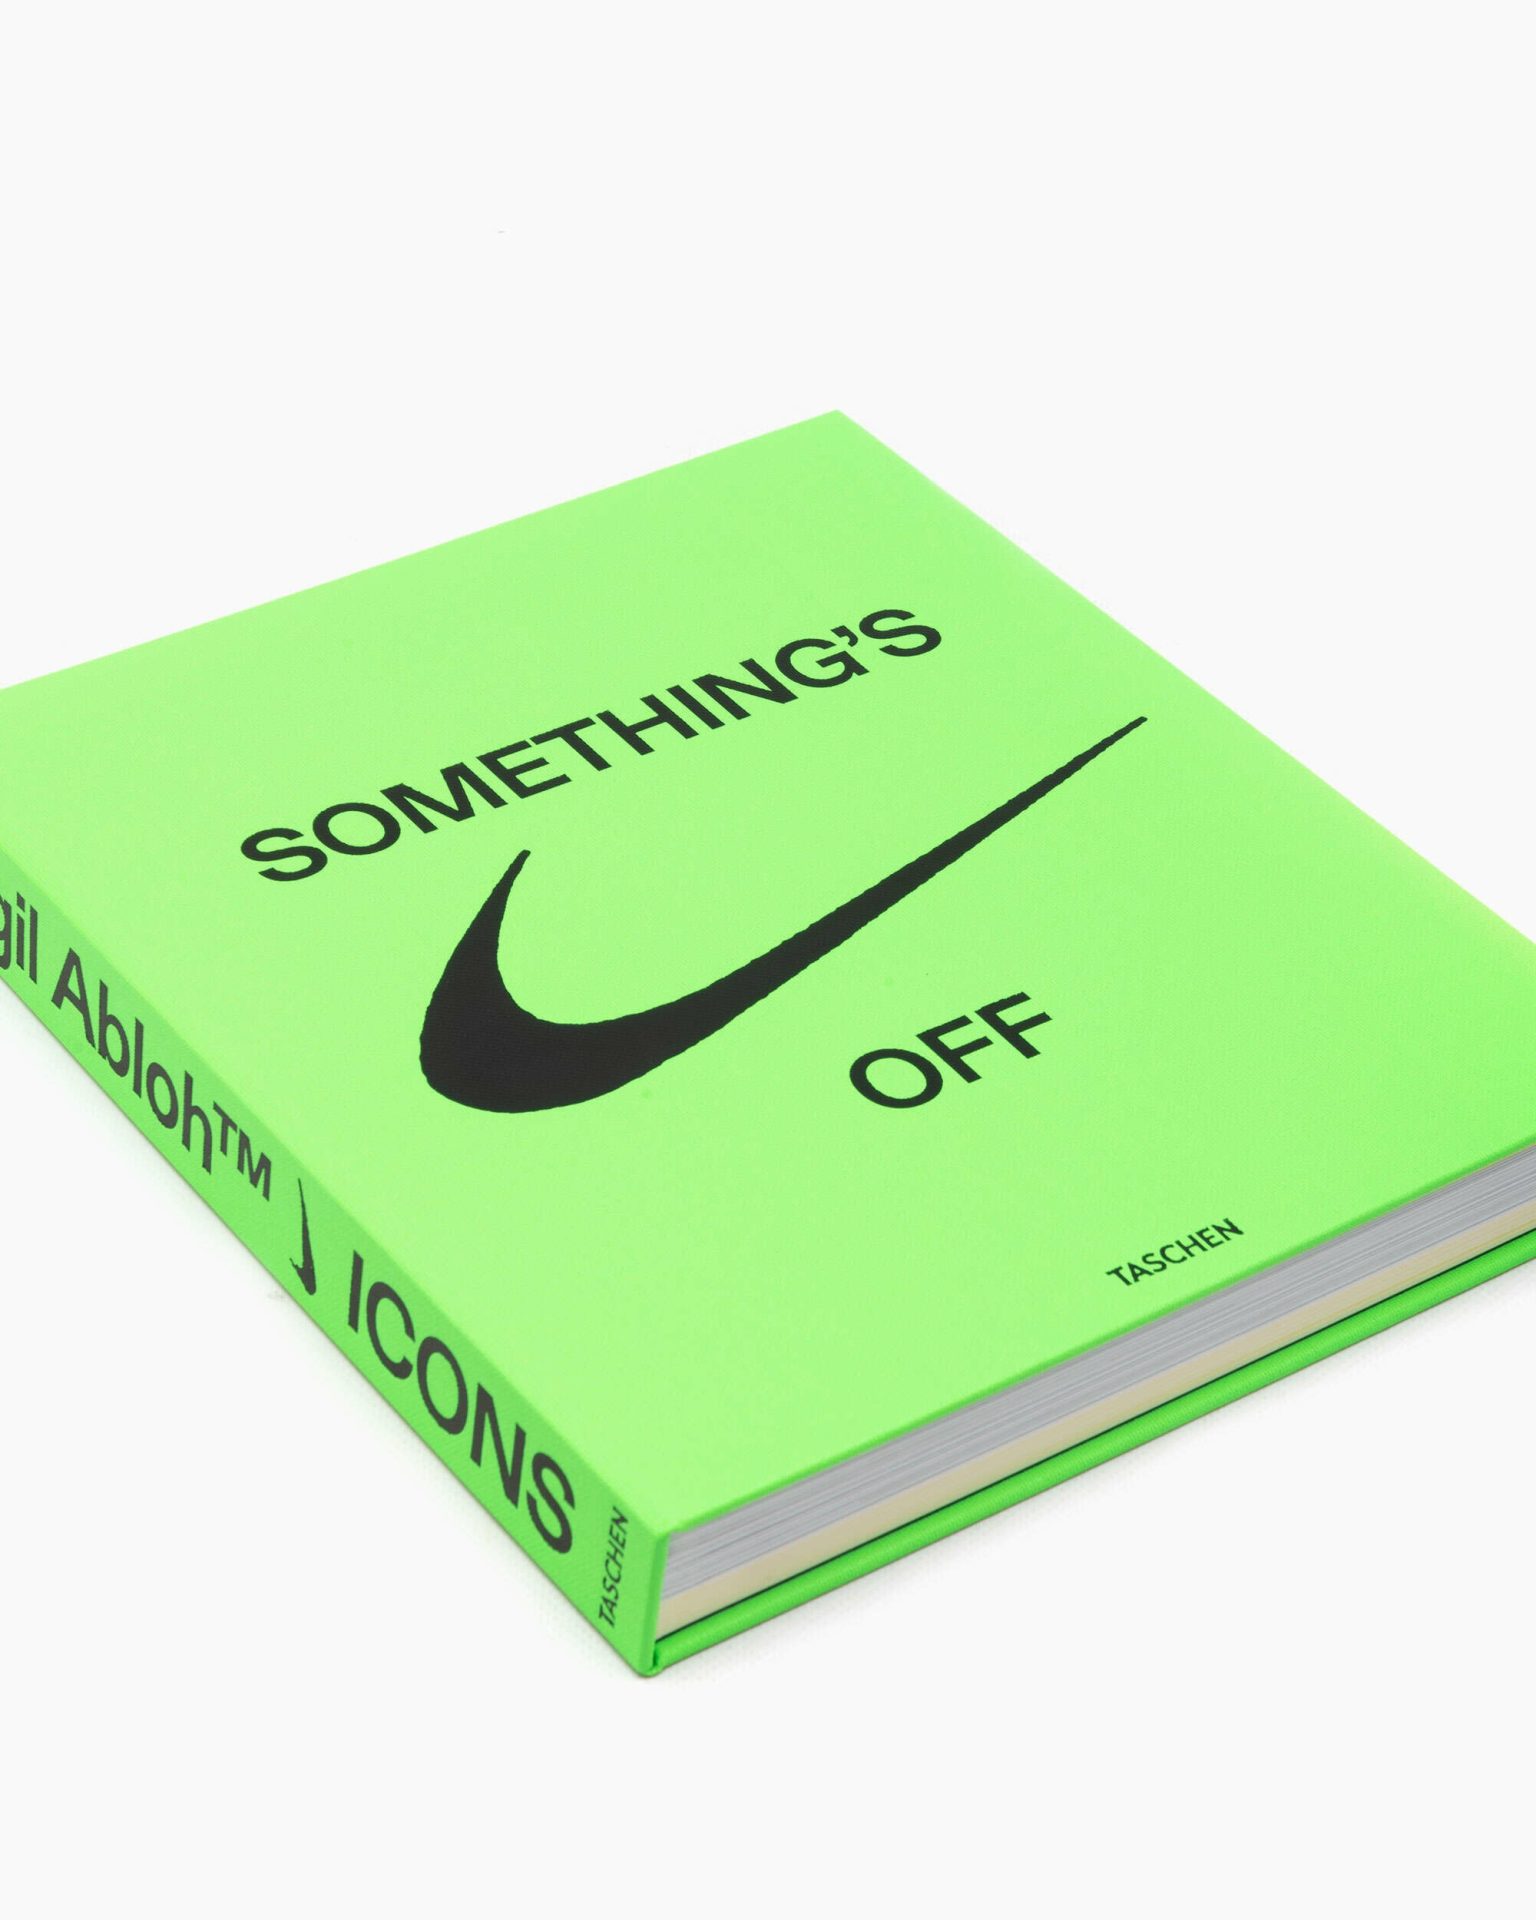 ICONS: Something's Off Virgil Abloh Book Nike Off-White (Hardcover